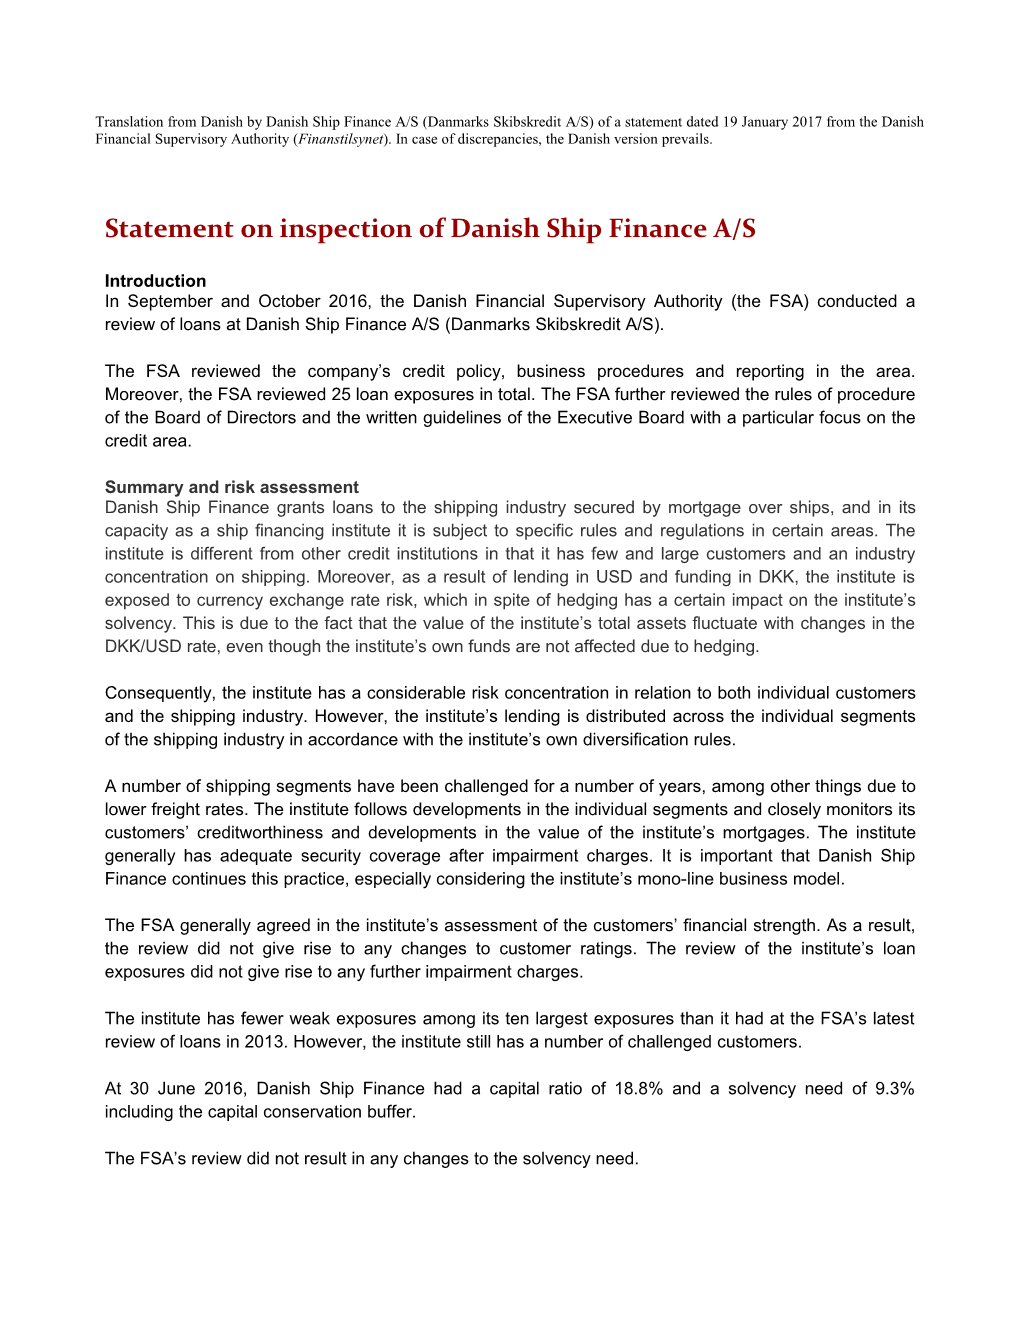 Statement on Inspection of Danish Ship Finance A/S